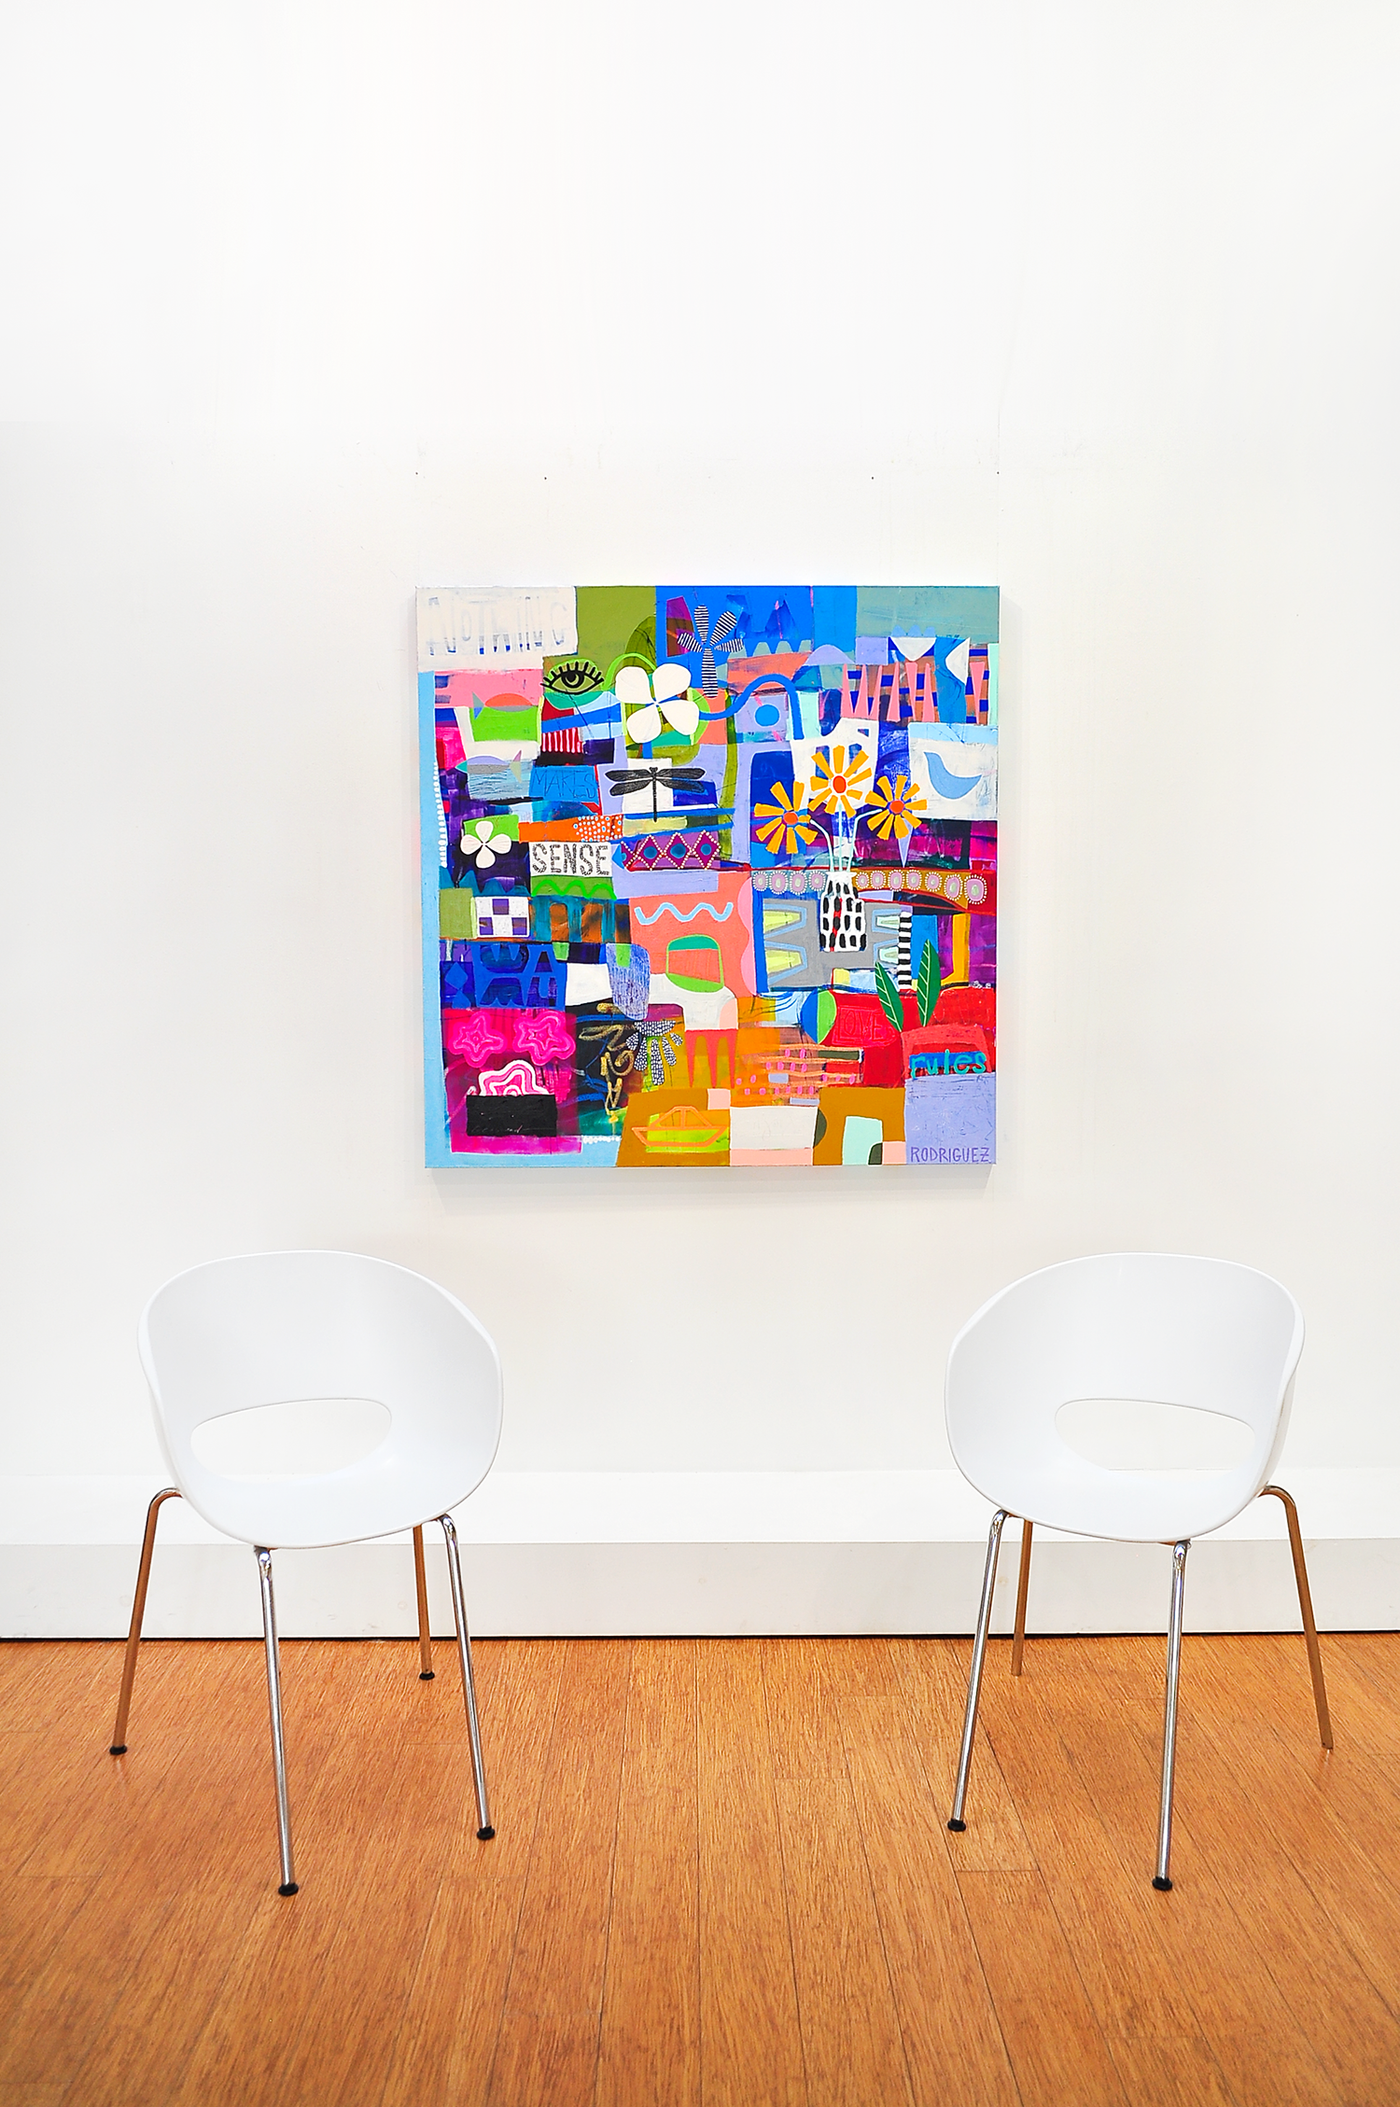 Still Love Rules - 48x48 on Canvas